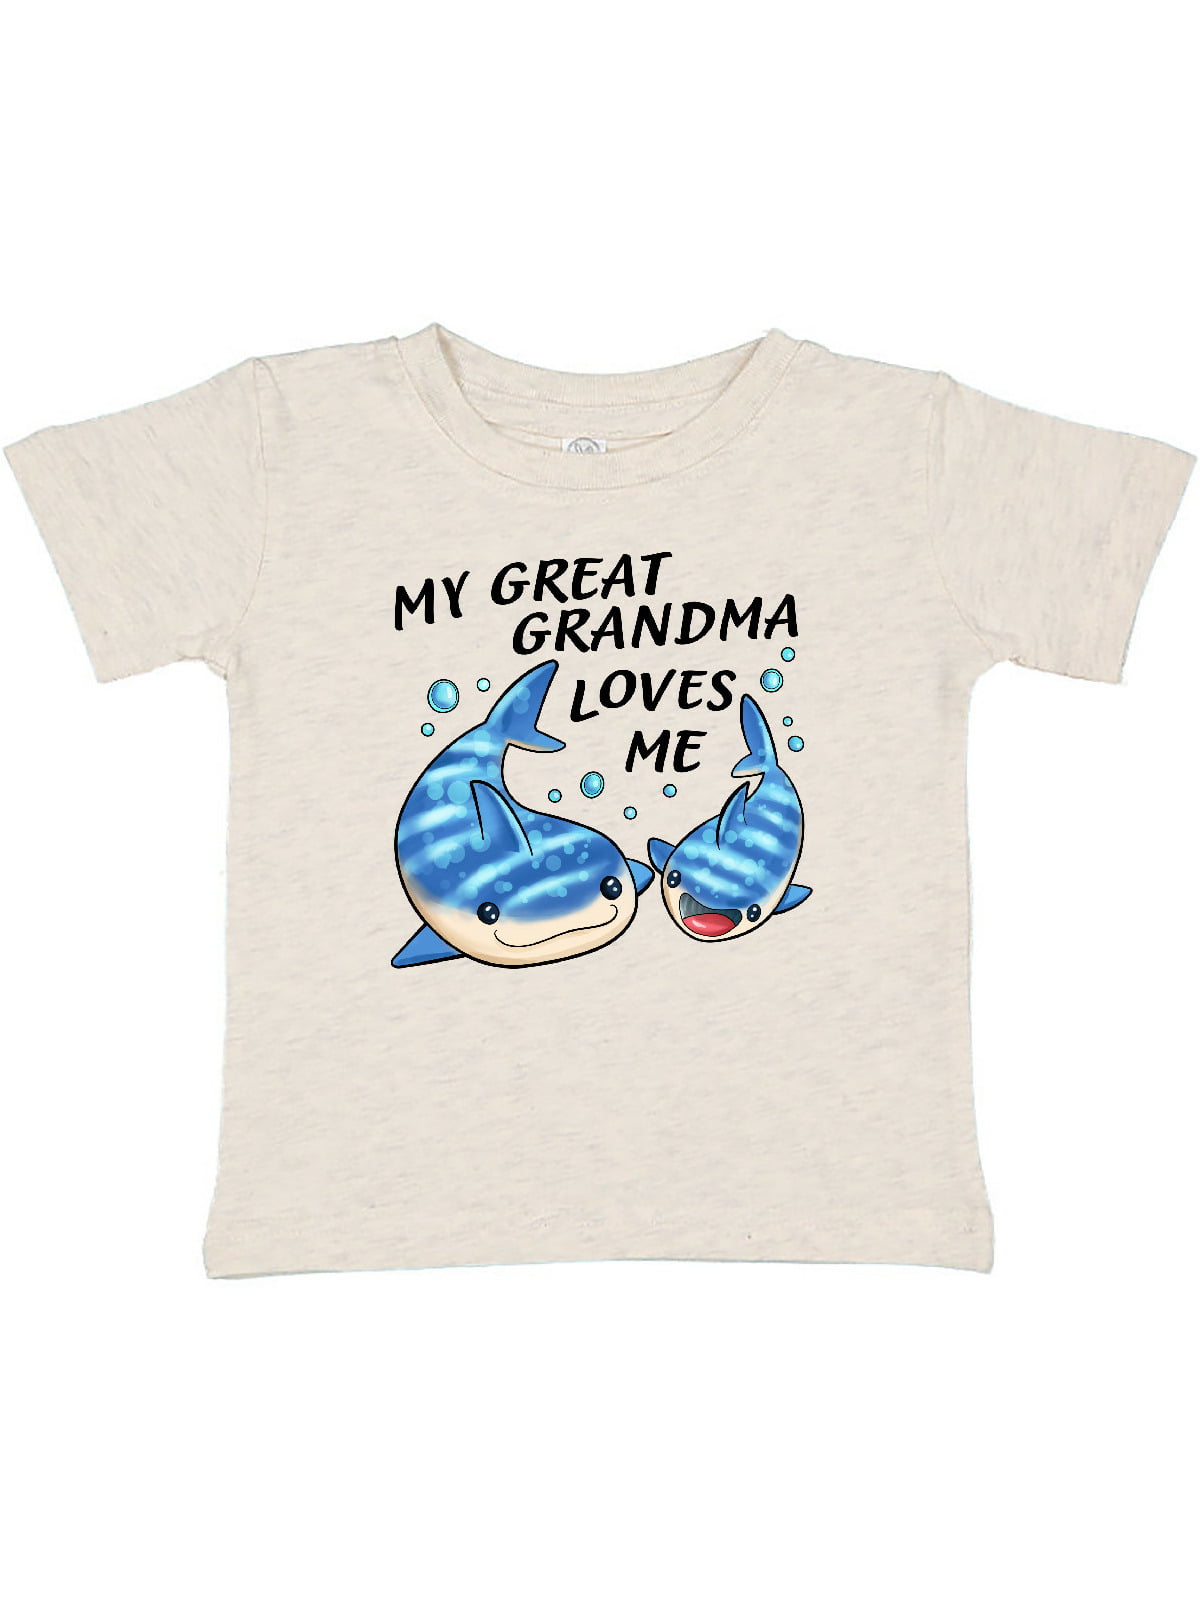 Whale Shark Baby T-Shirt inktastic My Mommy Loves Me